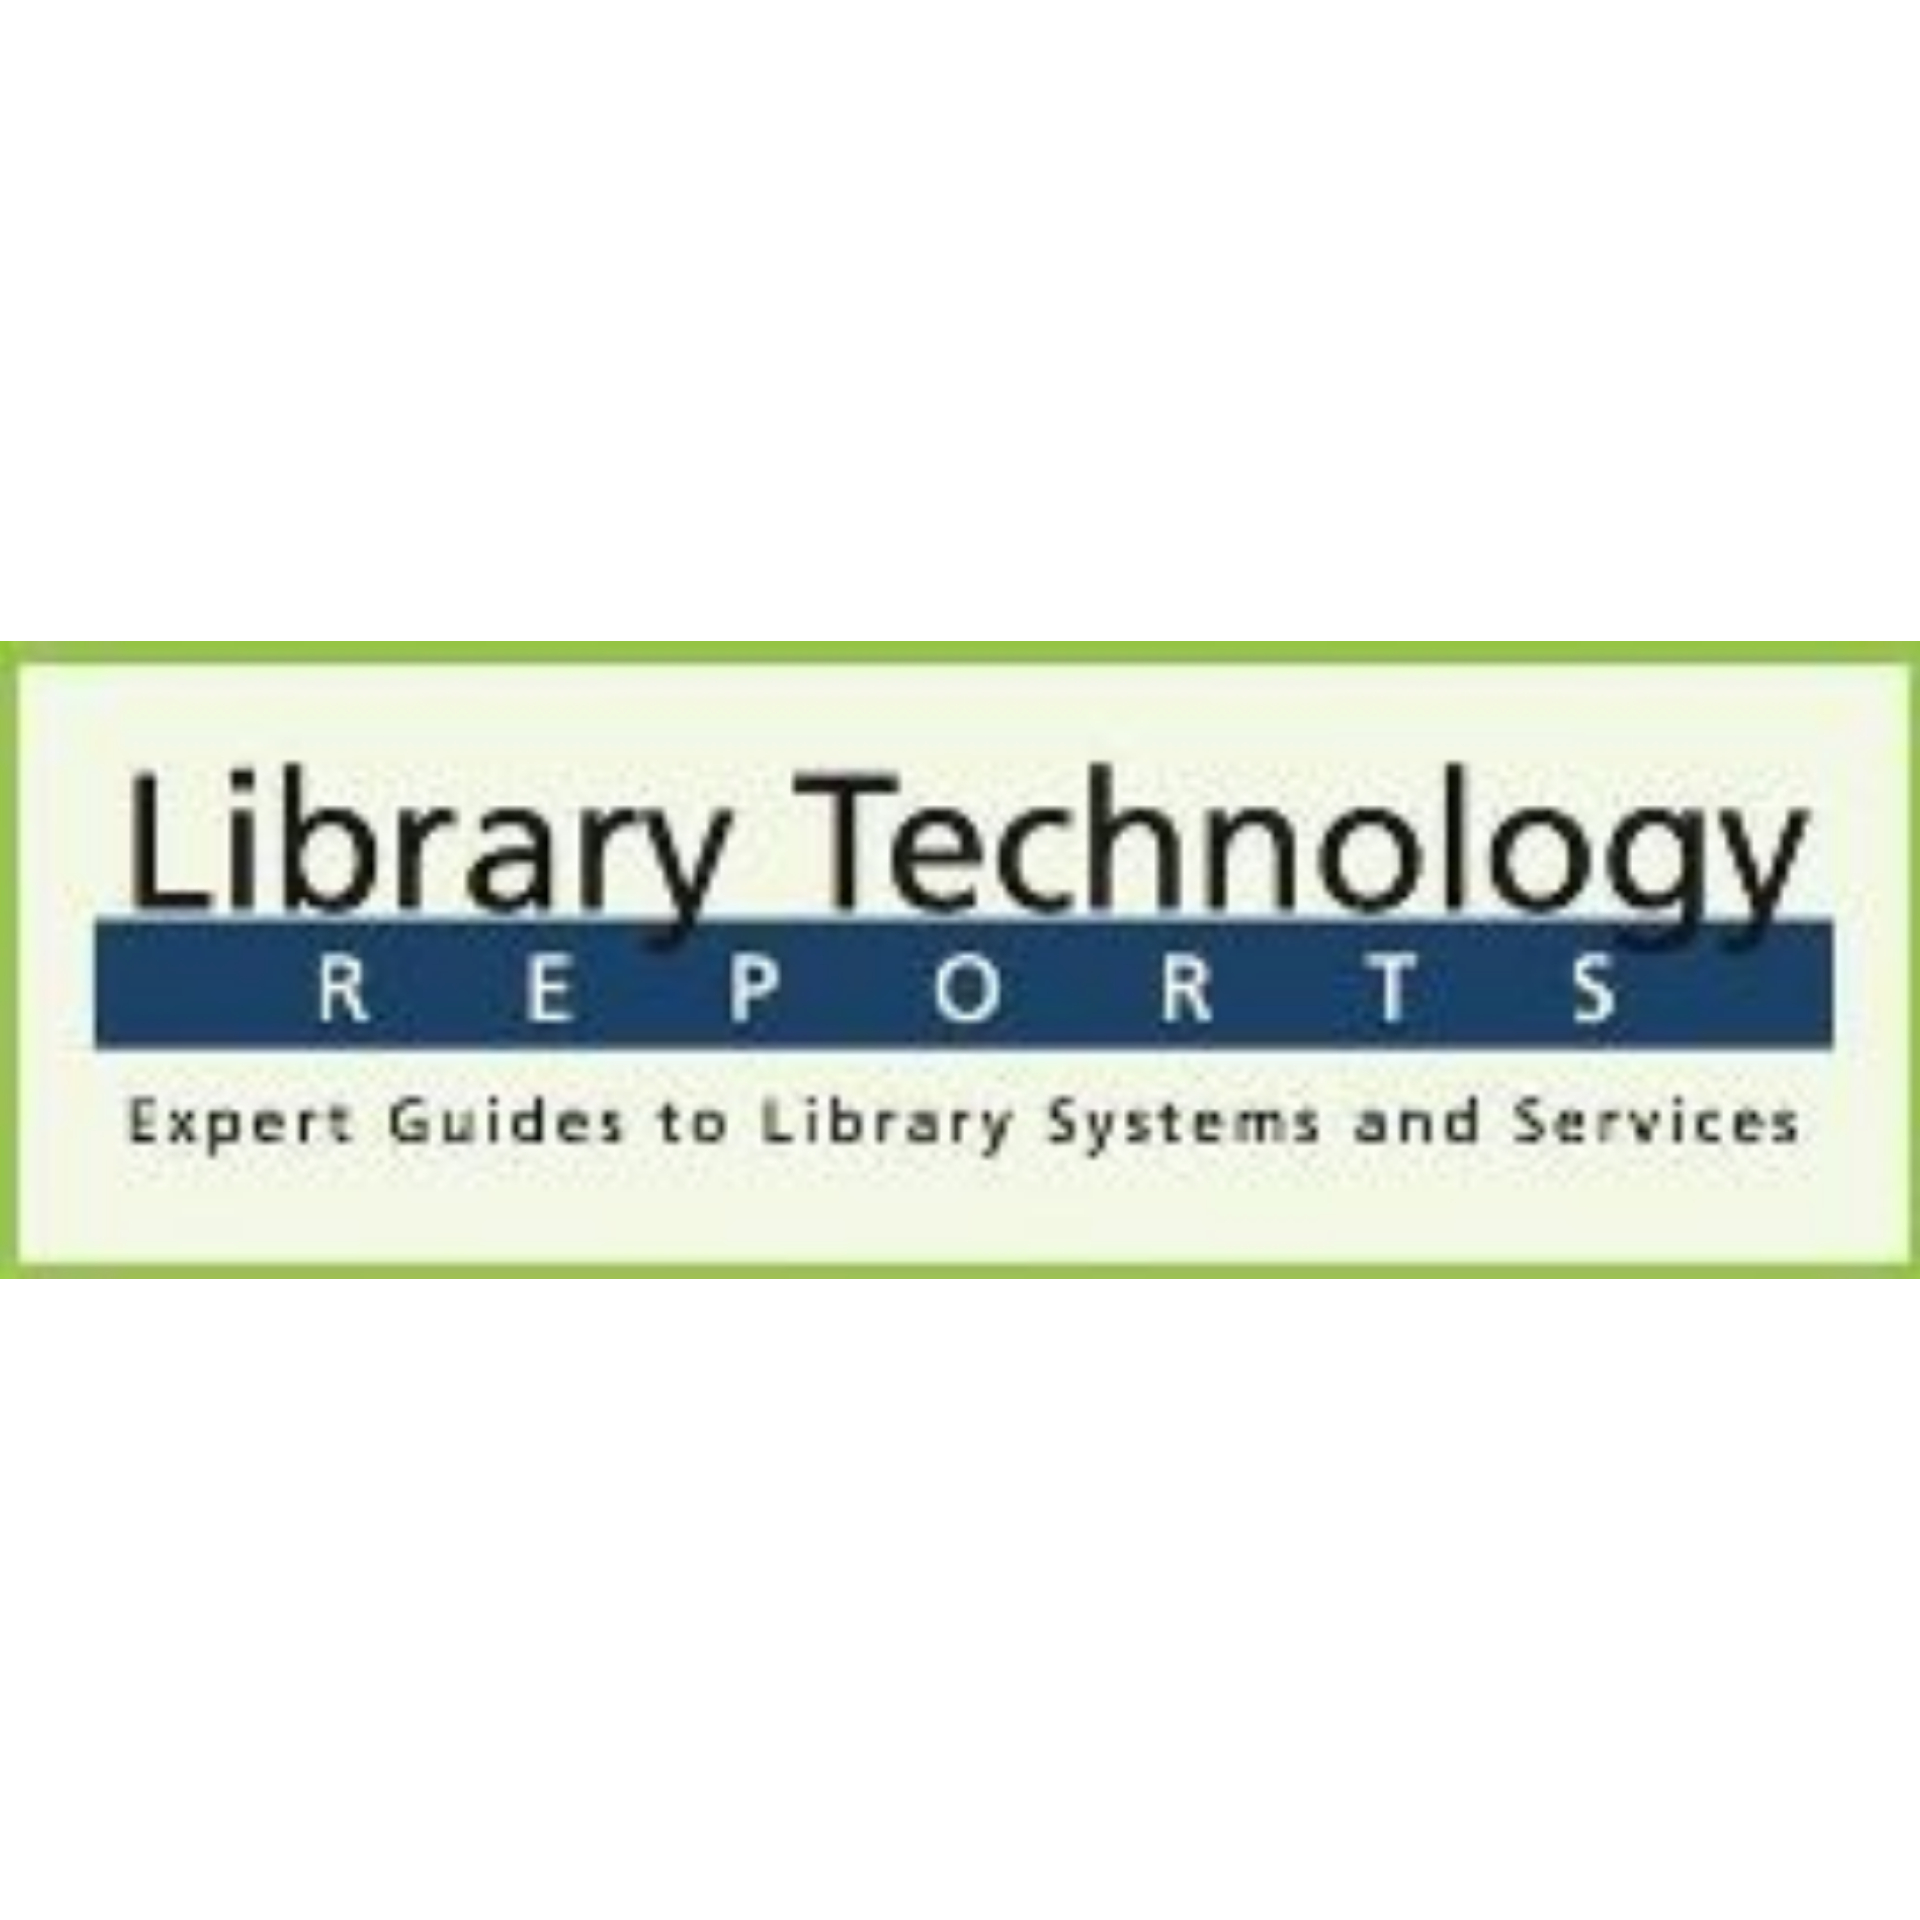 Library Technology Reports